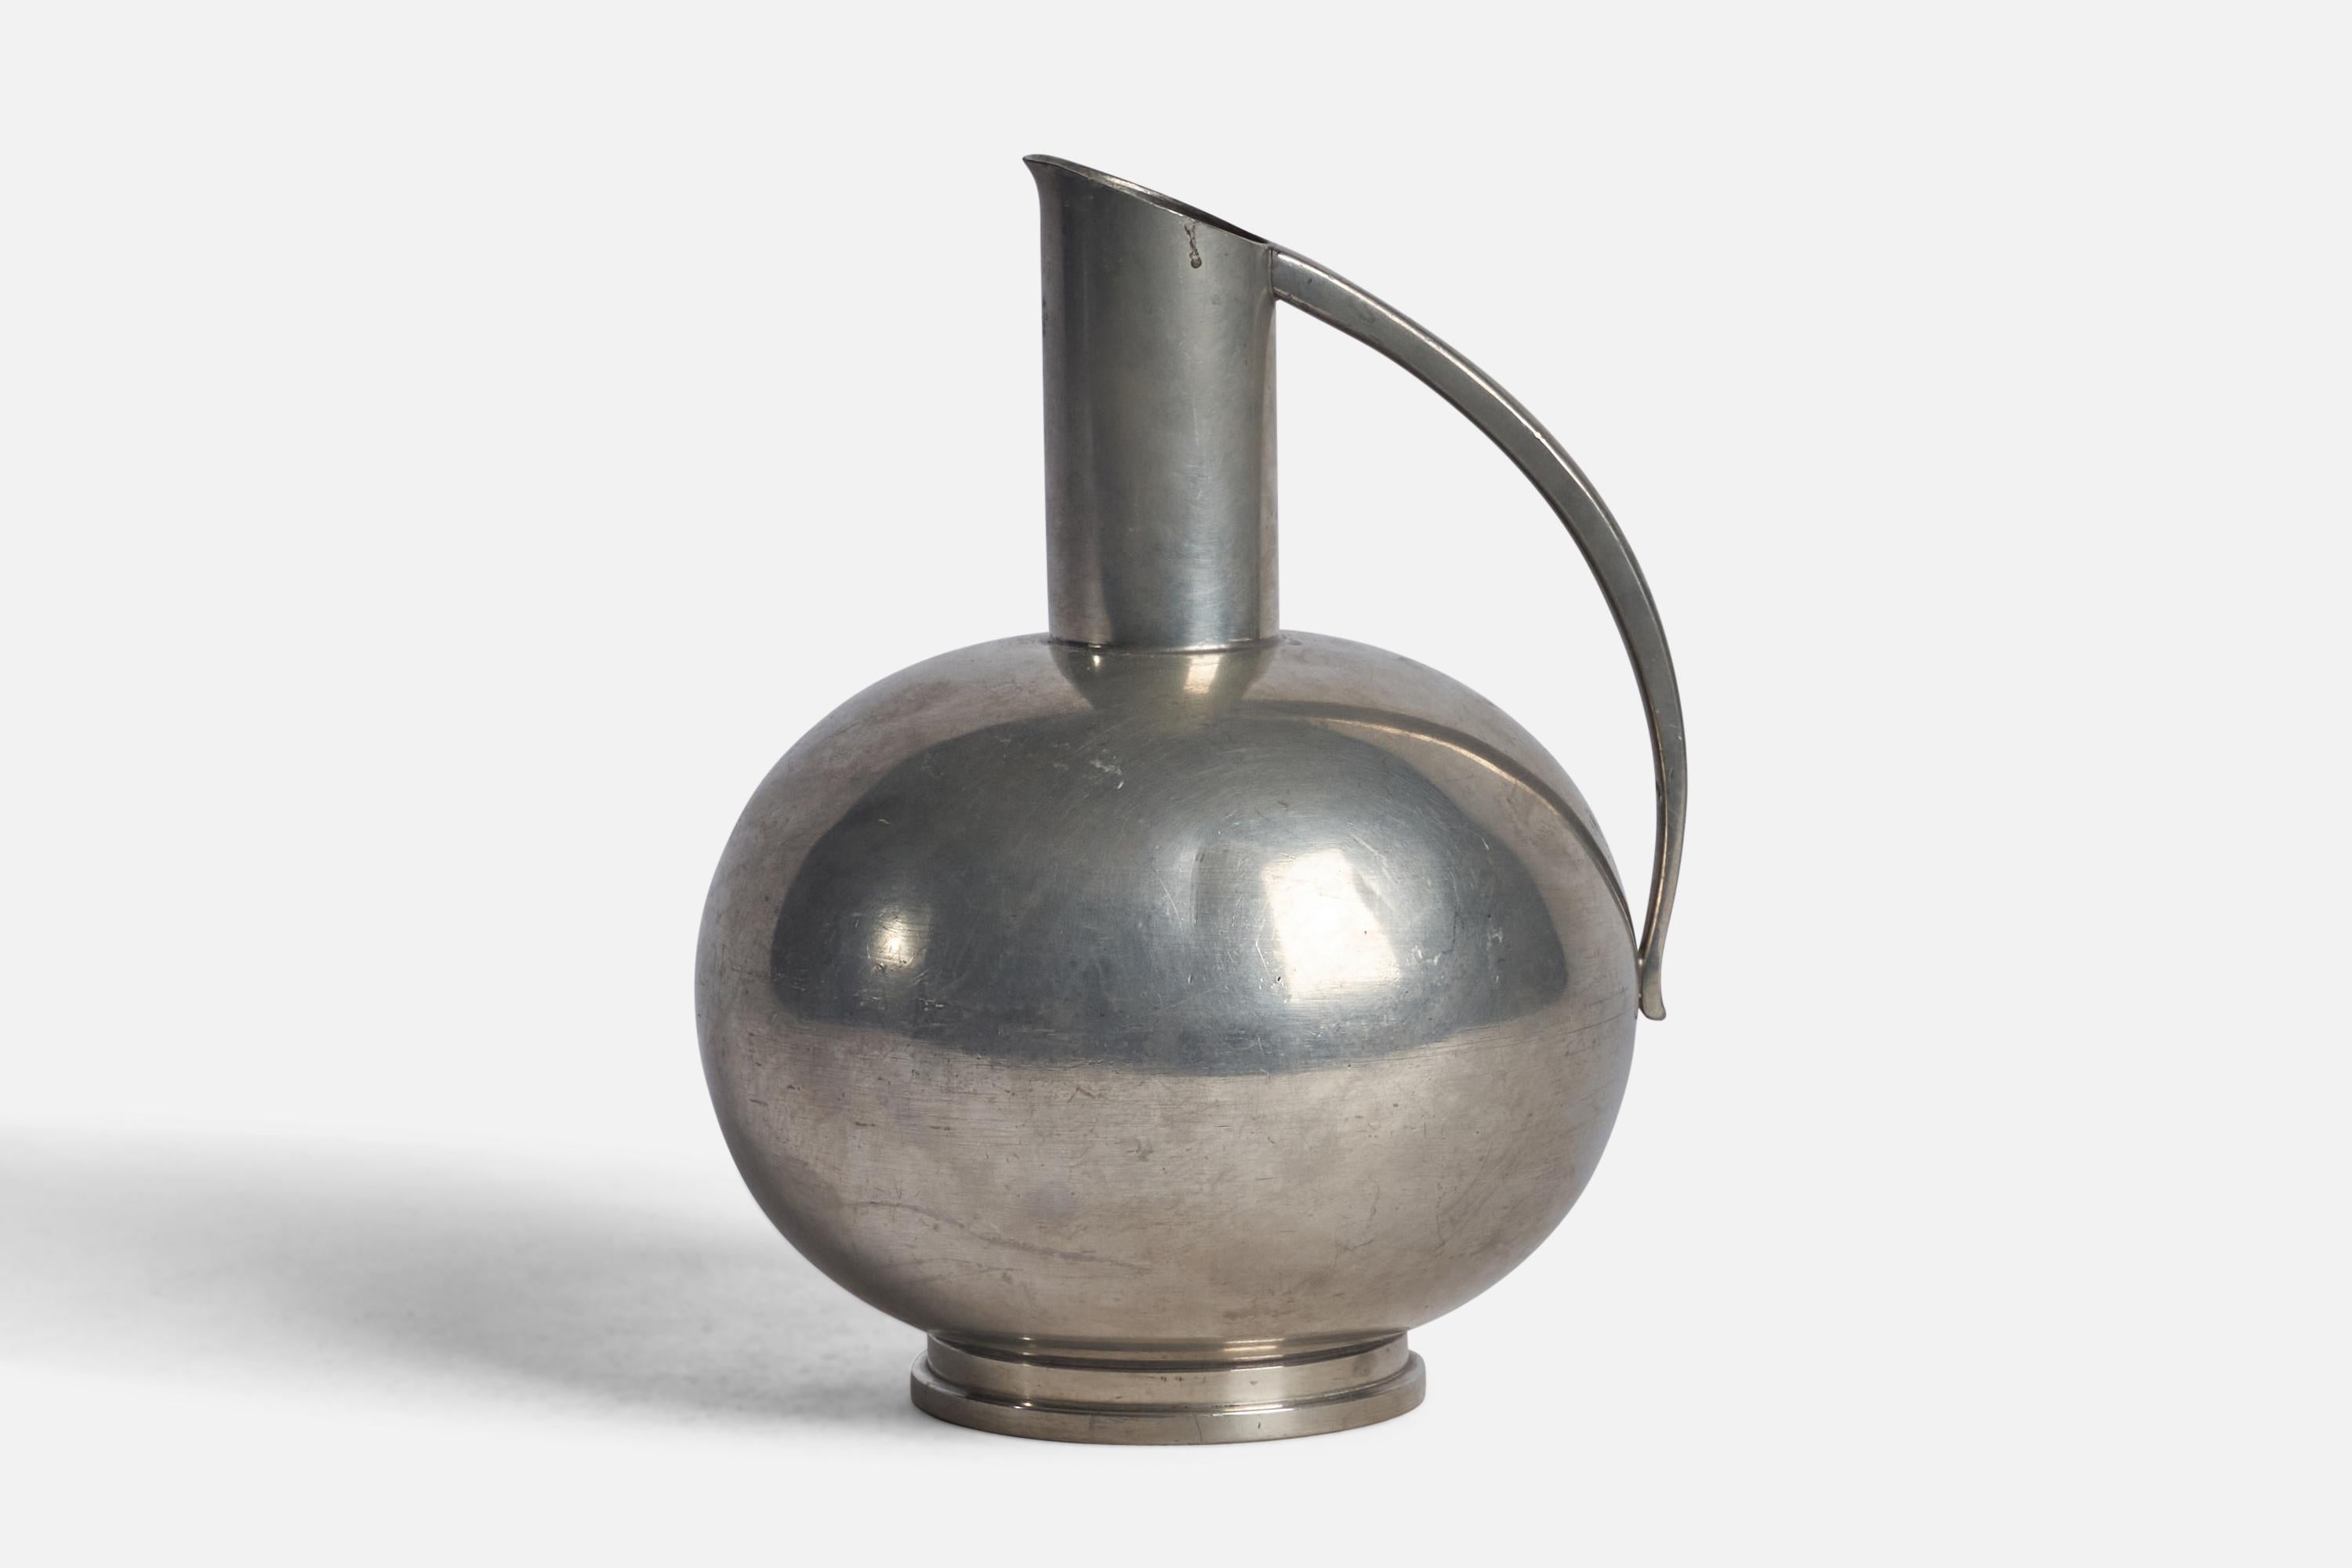 A pewter pitcher designed and produced in Sweden, 1930s.